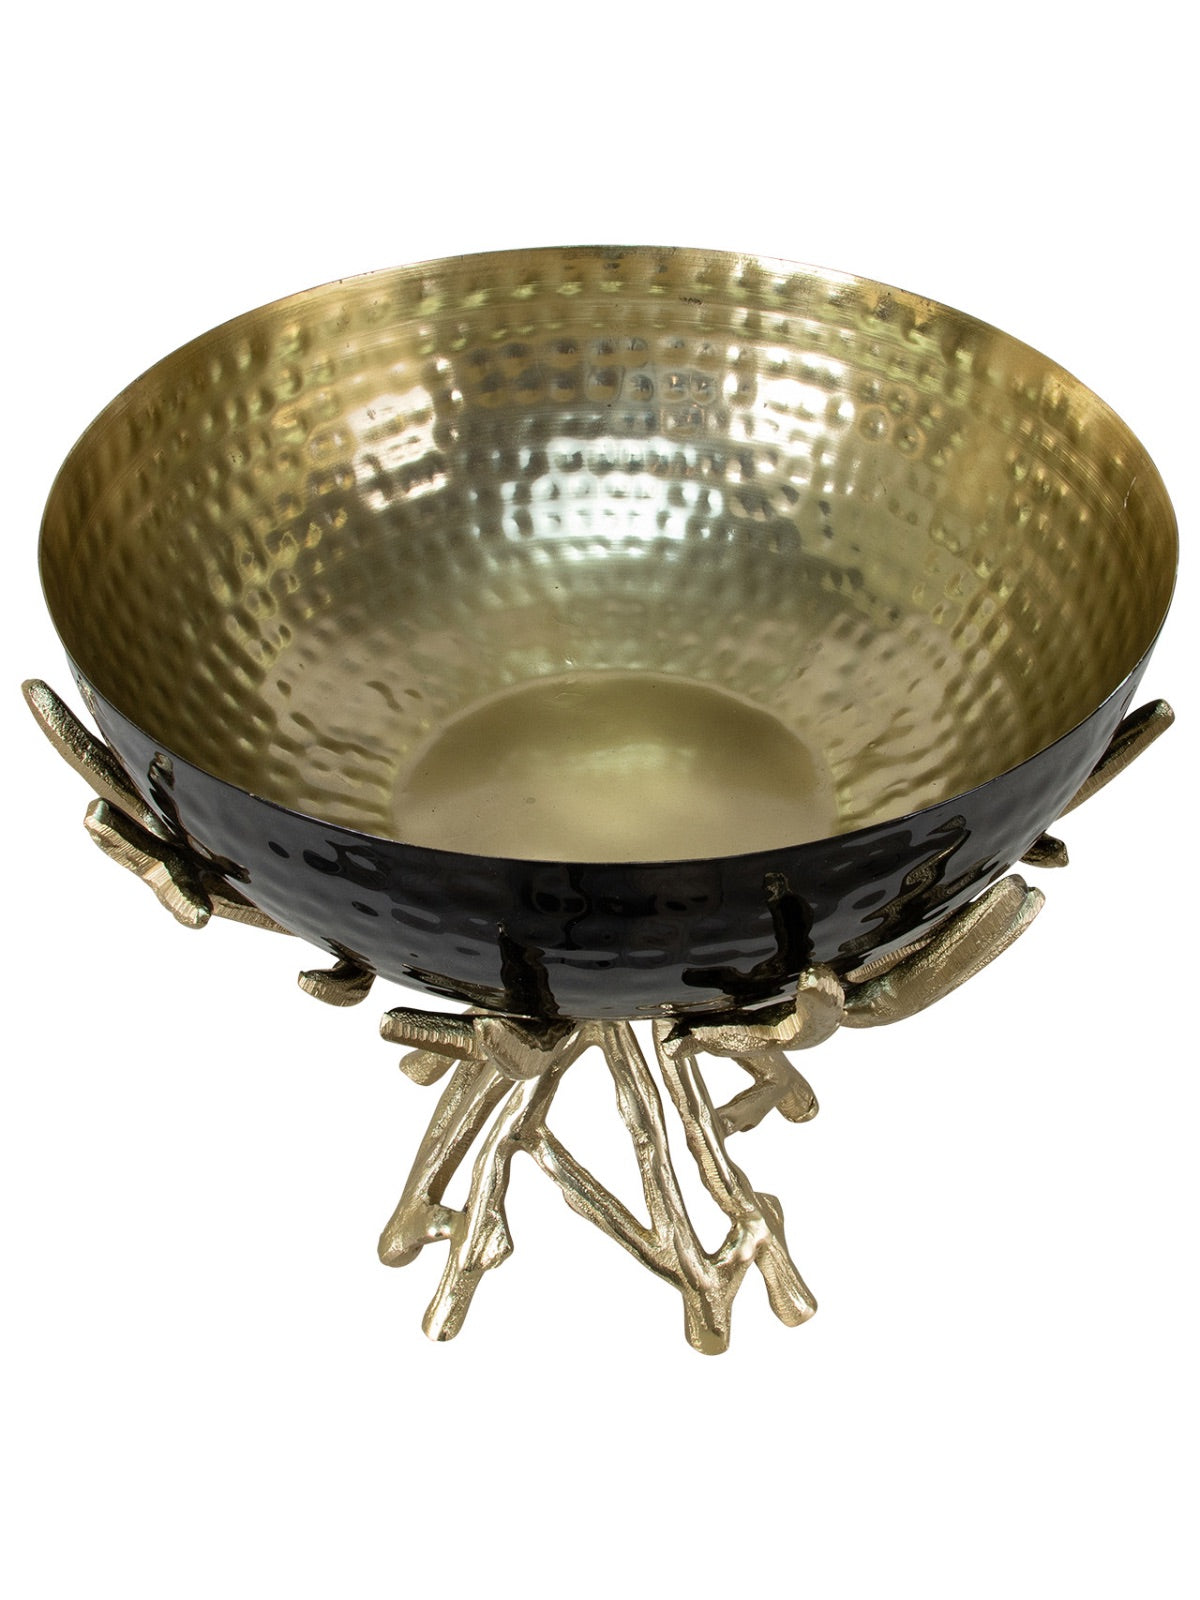 Decorative black bowl with gold interior sitting on a golden stainless steel branch stand sold by KYA Home Decor.